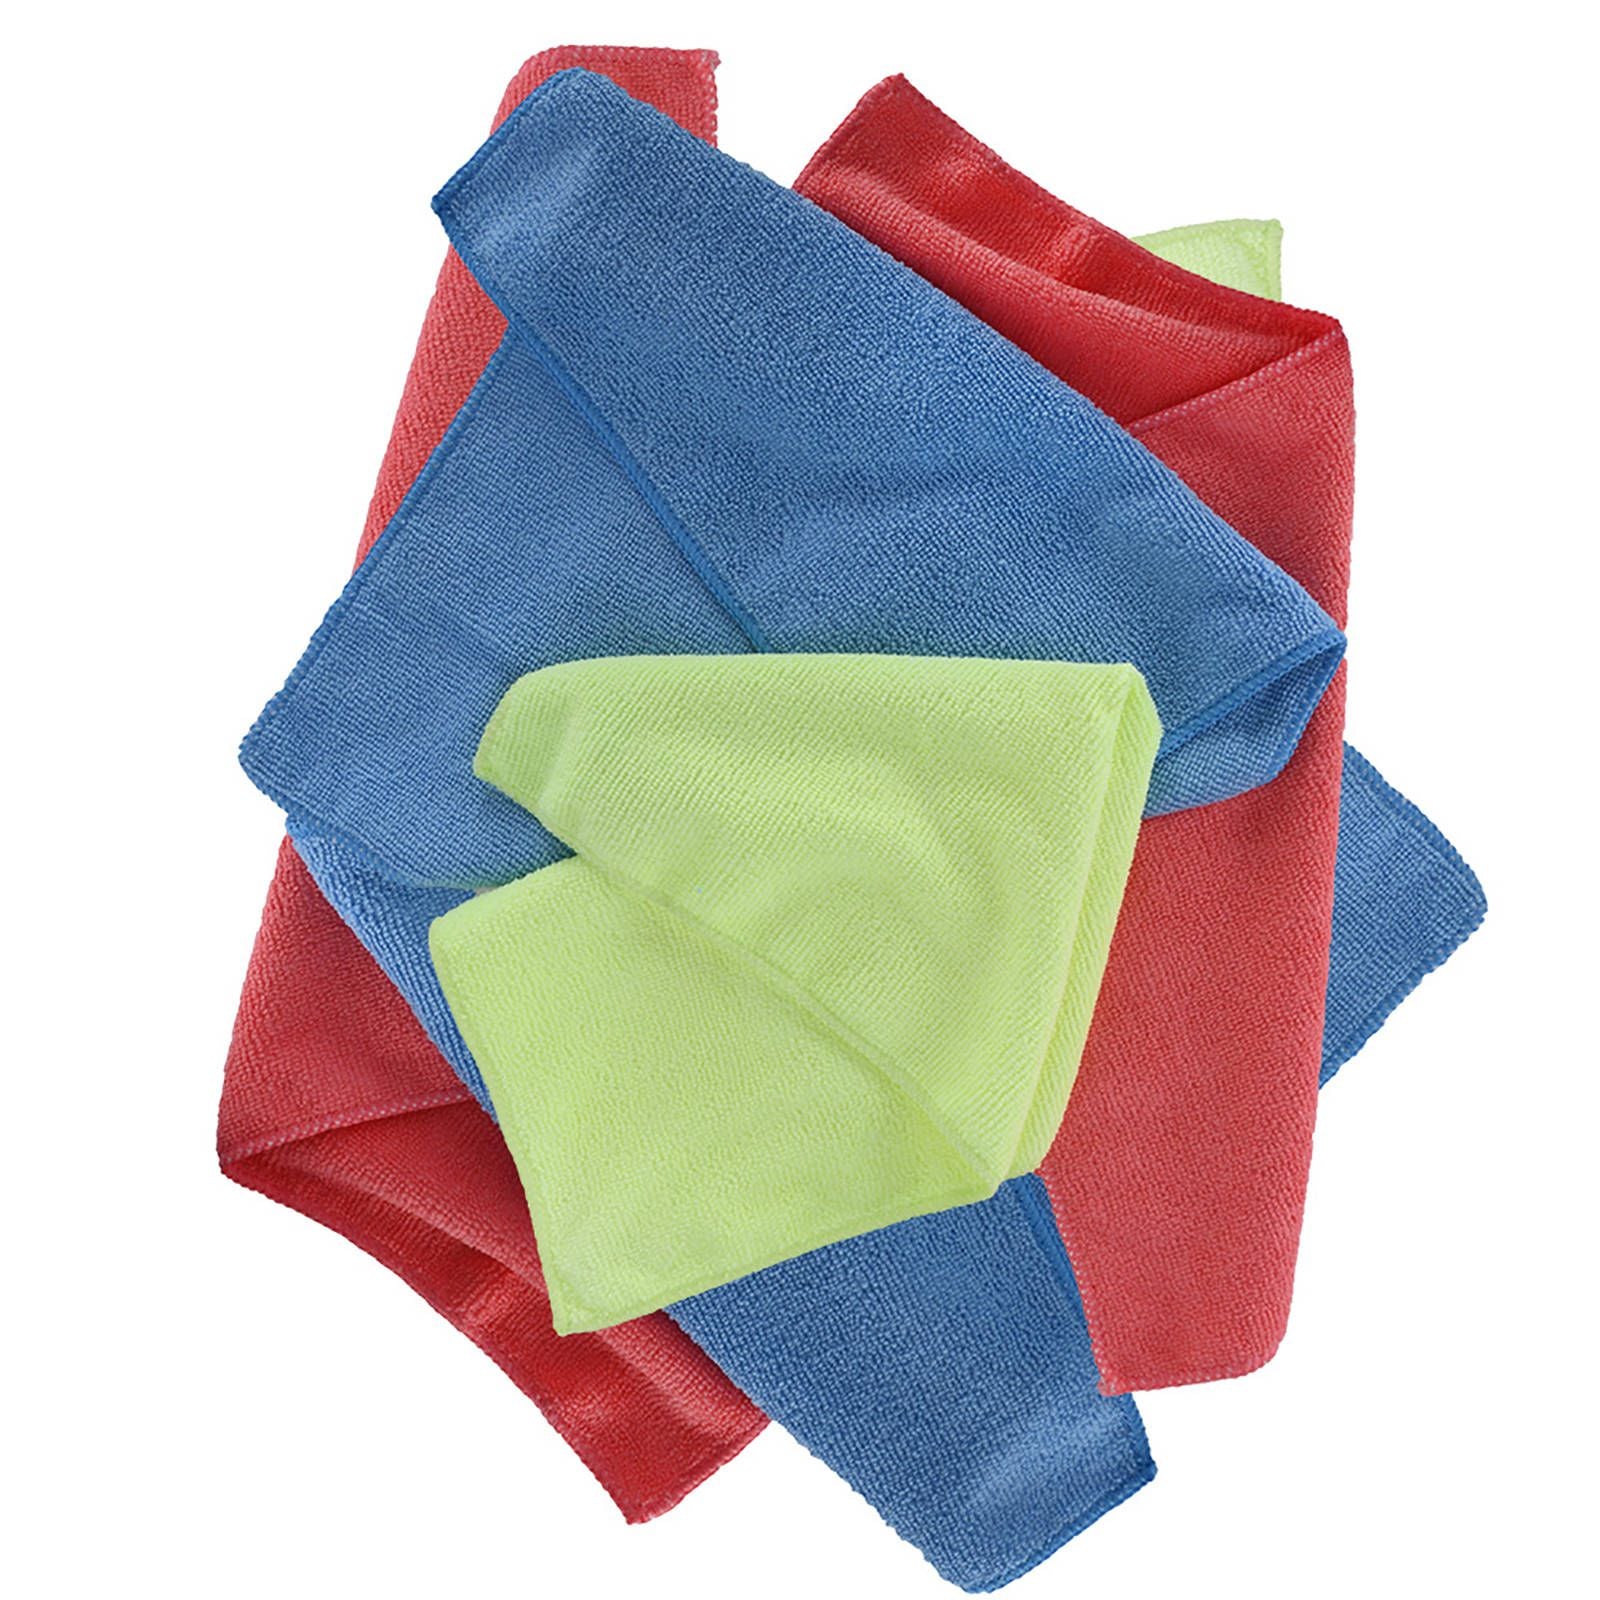 New OXFORD Microfibre Towels 6/PK Blue /Yellow /Red #OXOX253